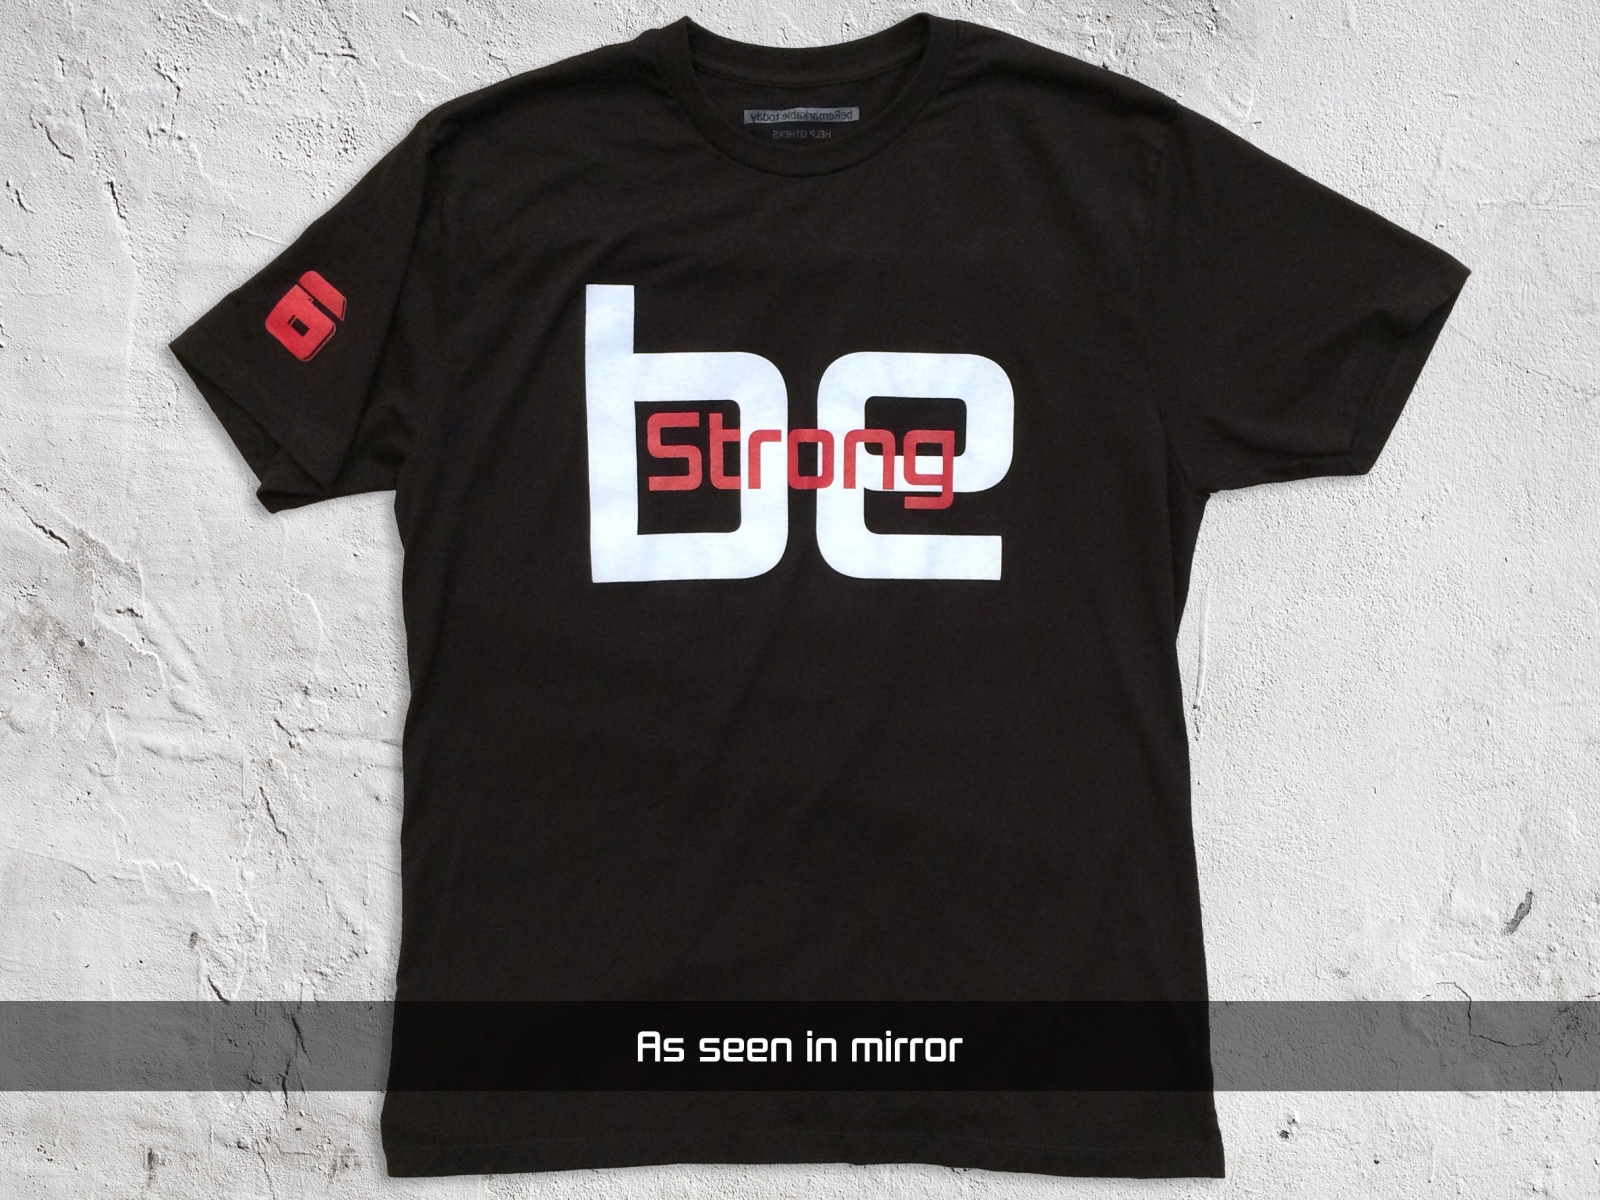 be Strong – Men’s Black T-shirt (as seen in mirror)